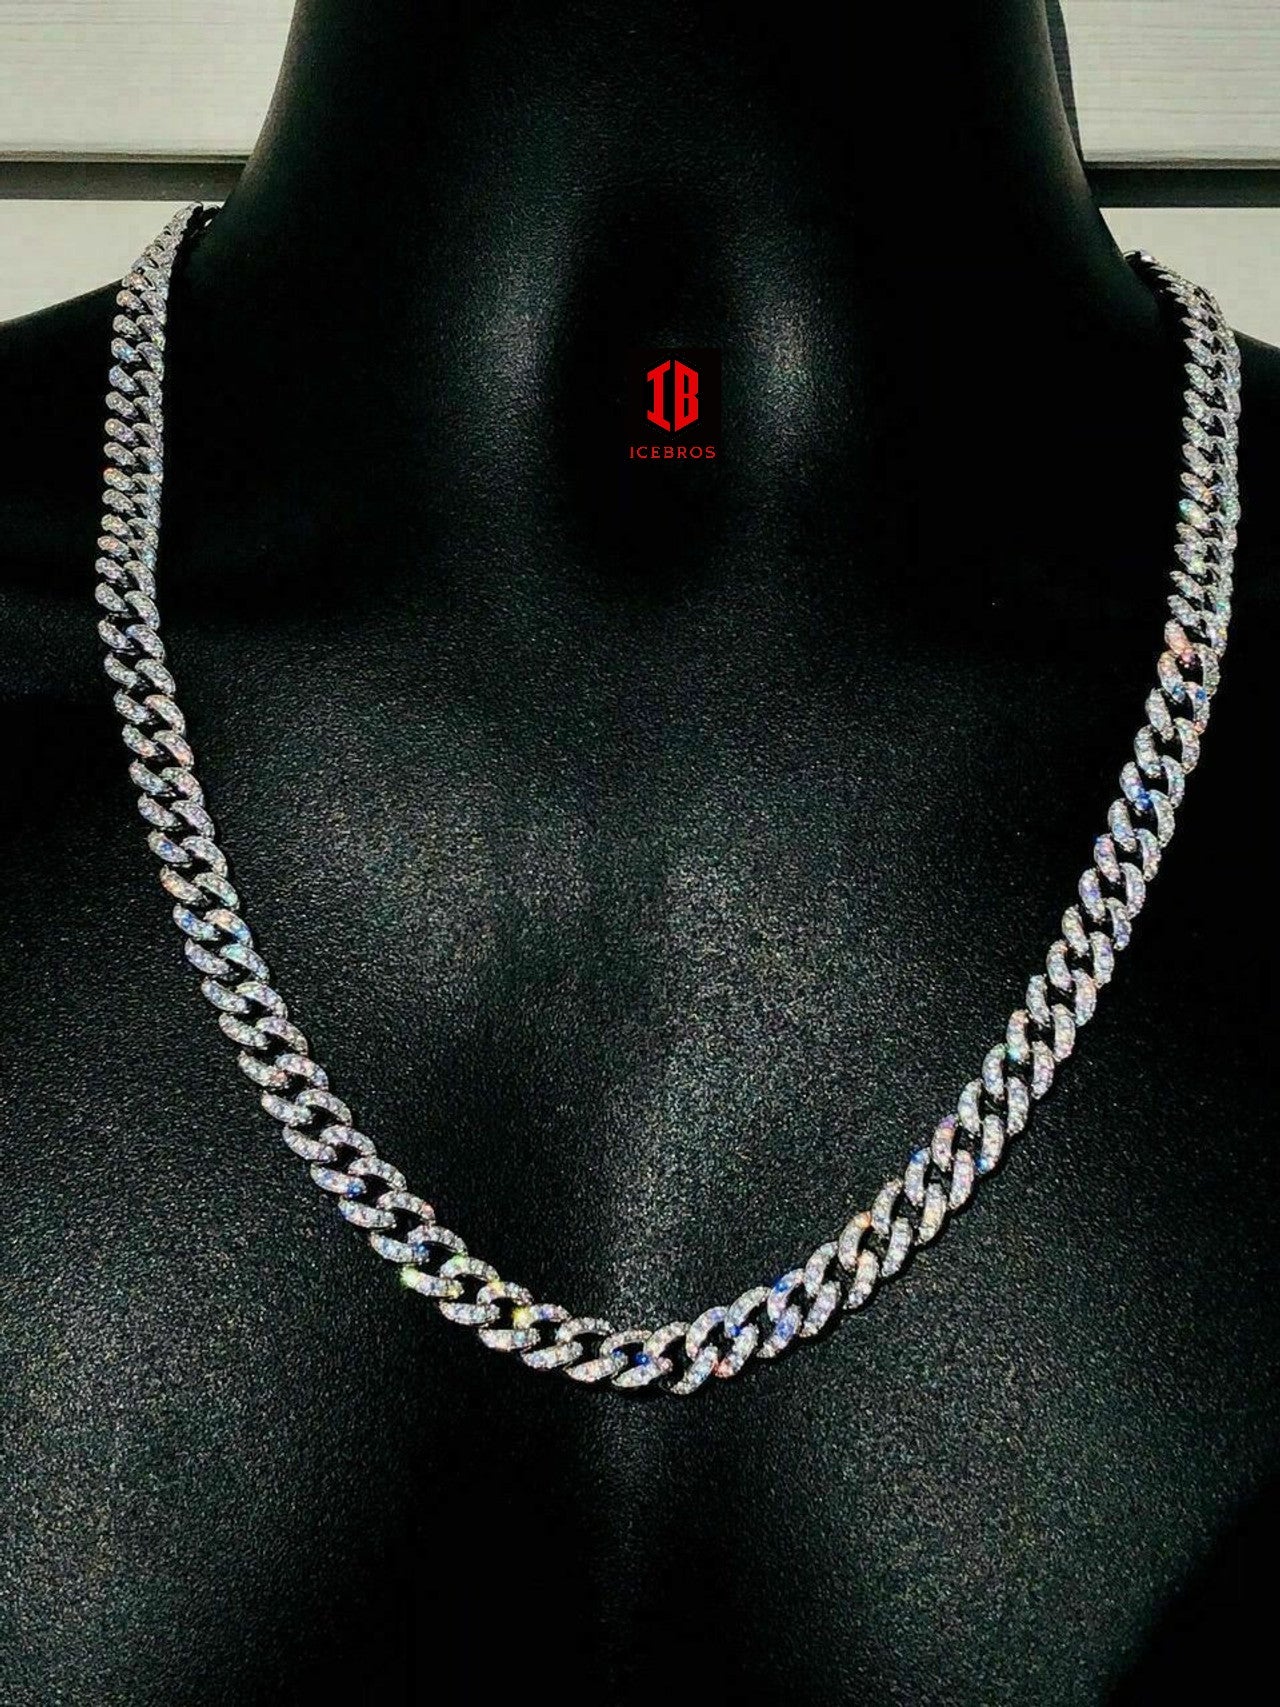 YELLOW GOLD Mens Miami Cuban Link 9mm Chain 14k Gold Over Solid 925 Silver 25ct Man Made Diamonds